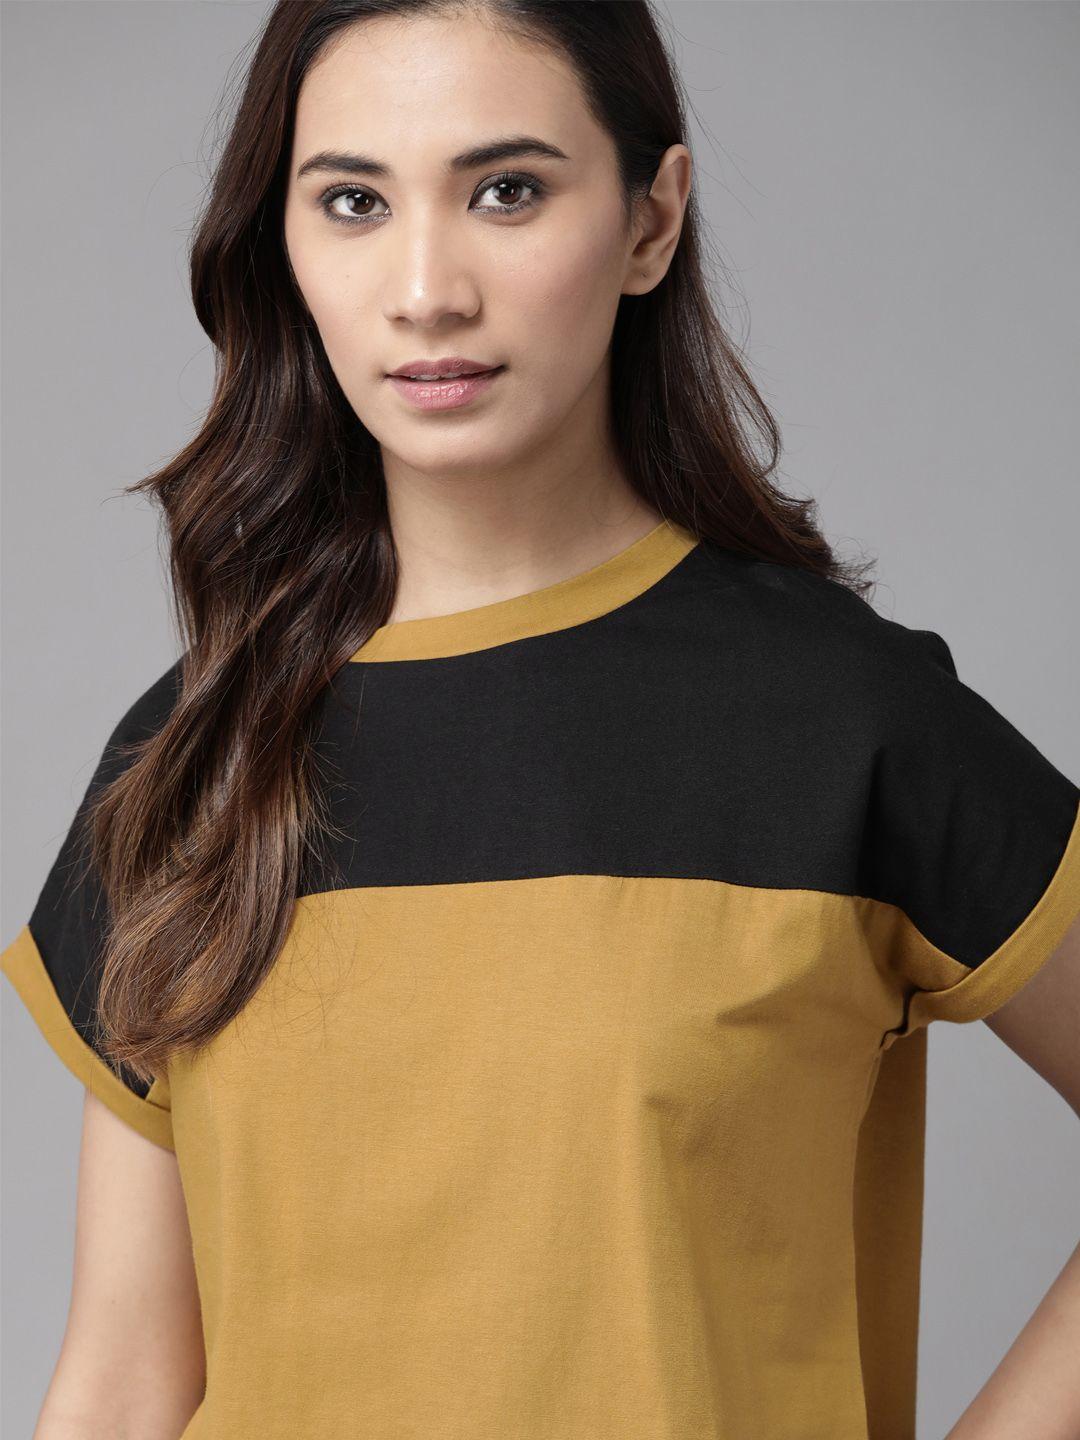 the roadster lifestyle co women mustard yellow  black colourblocked round neck pure cotton t-shirt